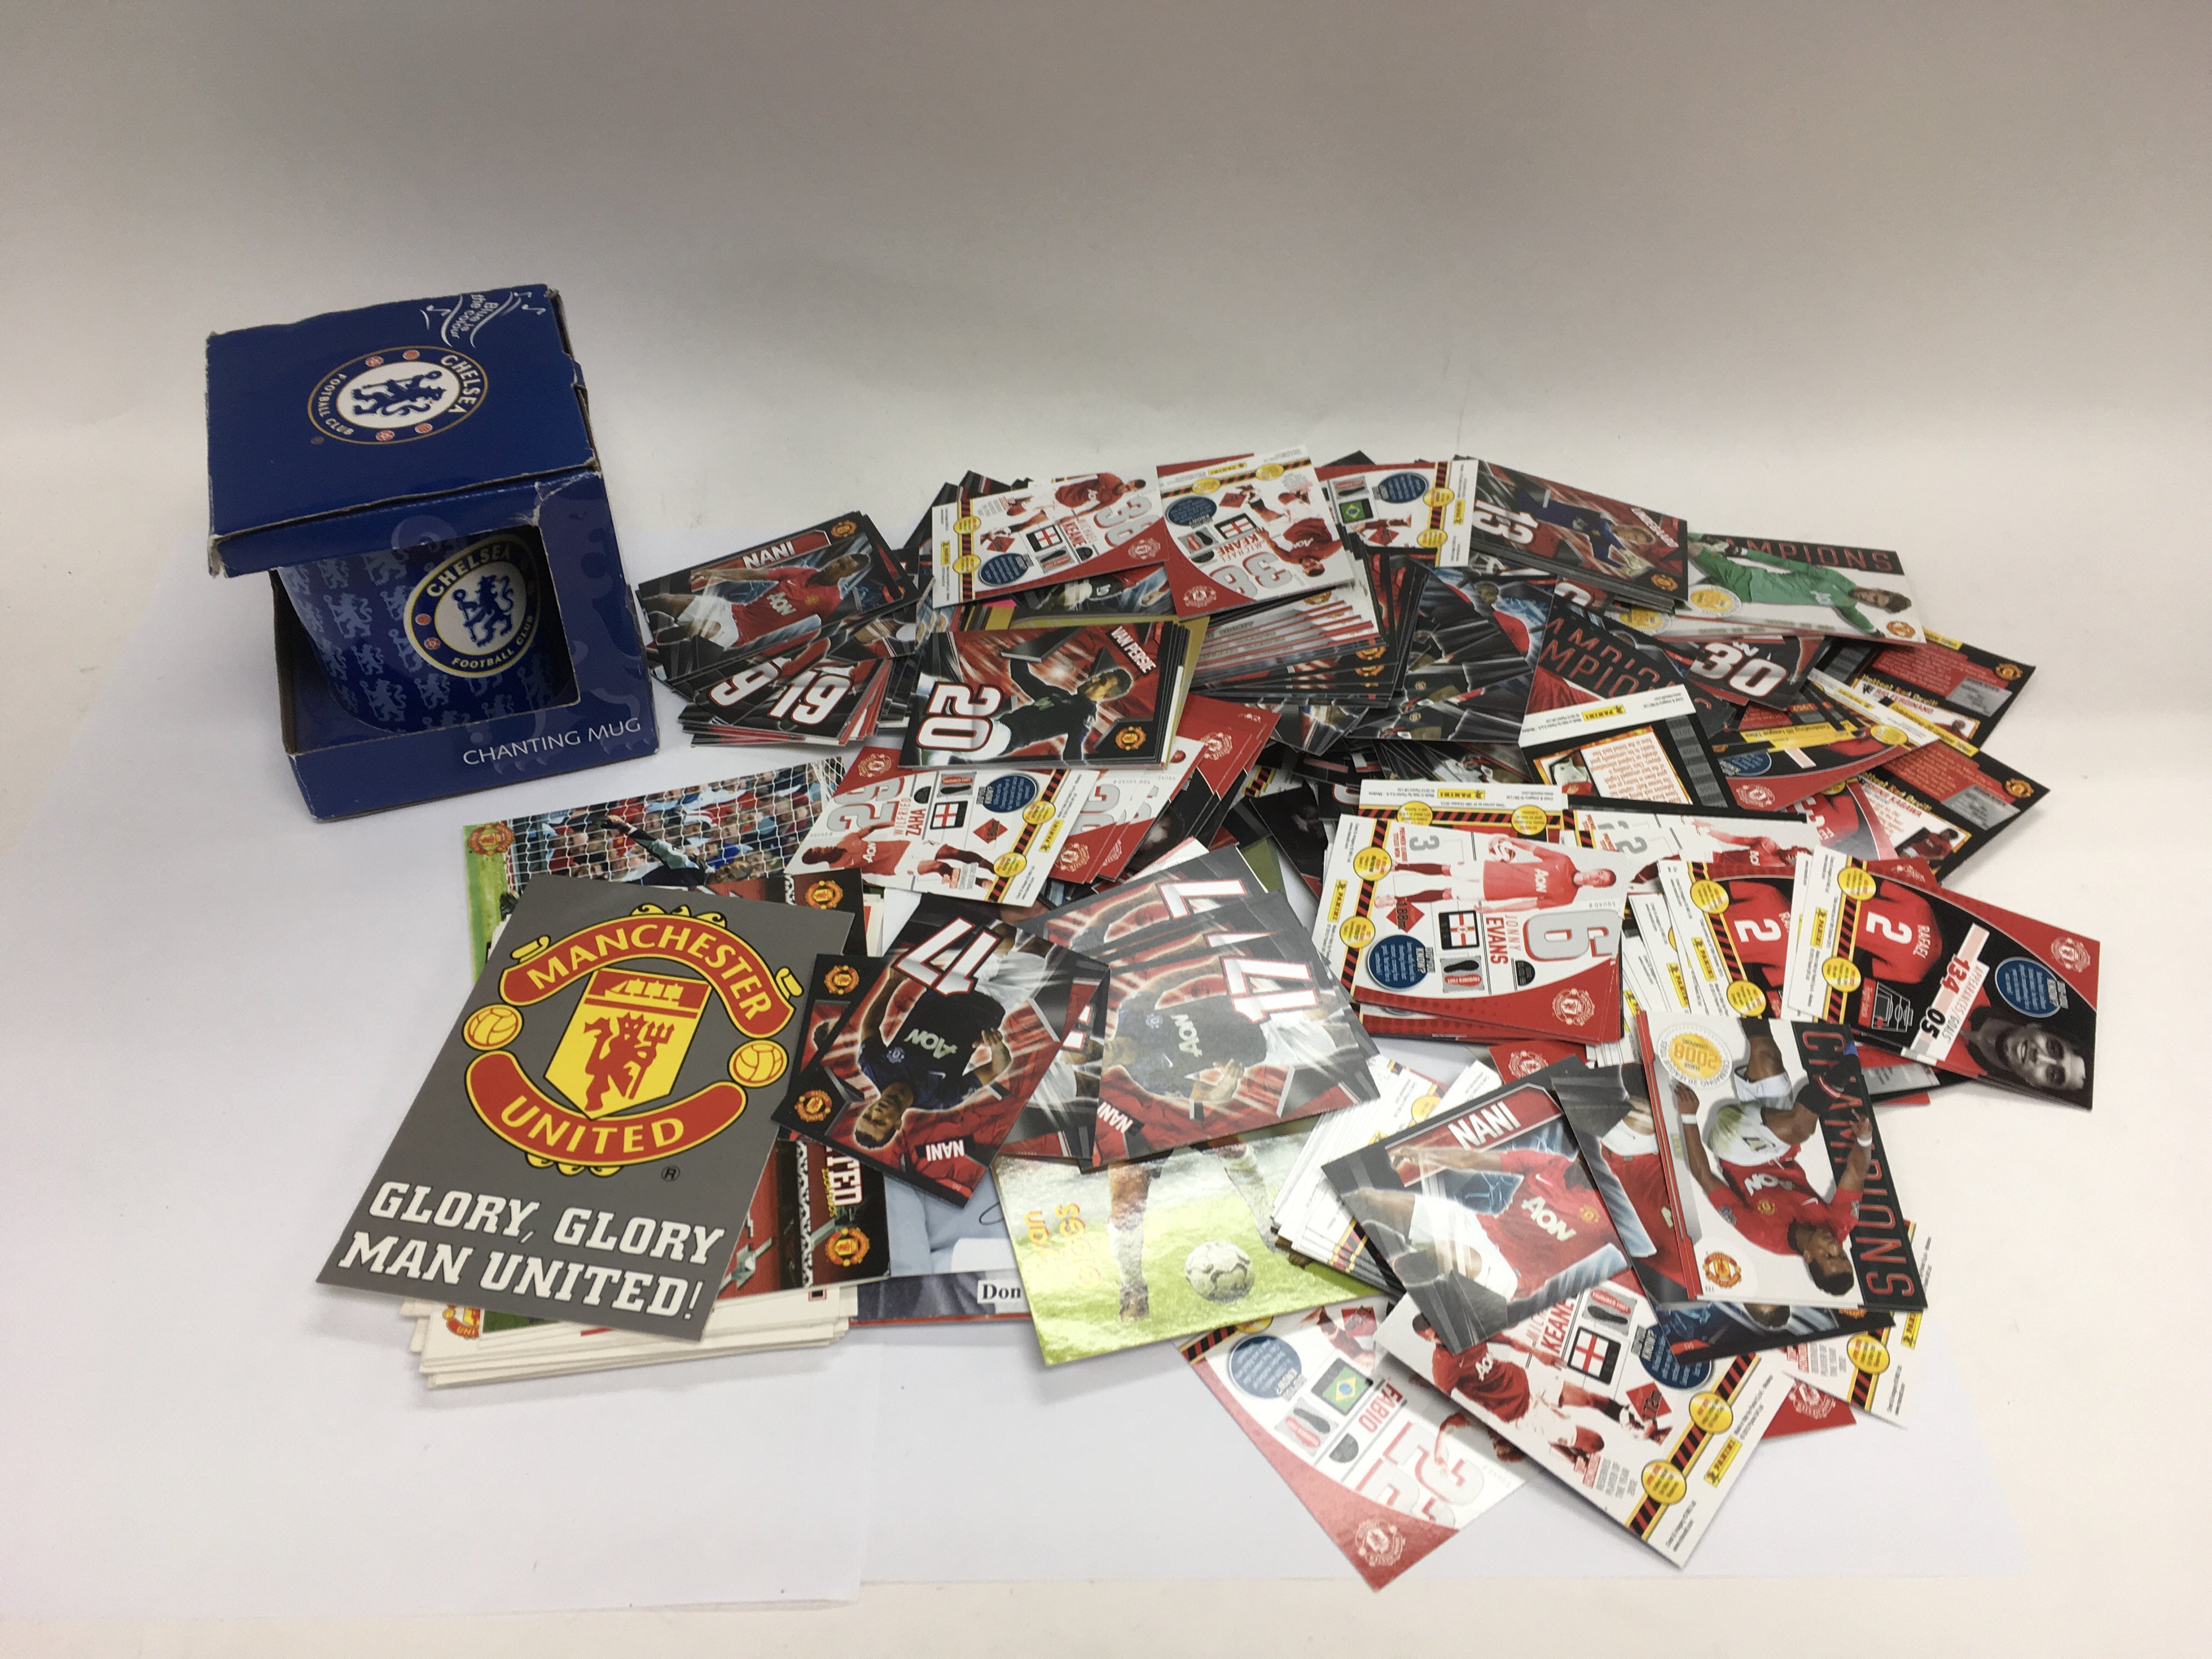 A box containing football memorabilia including postcards, trade cards and framed pictures plus a